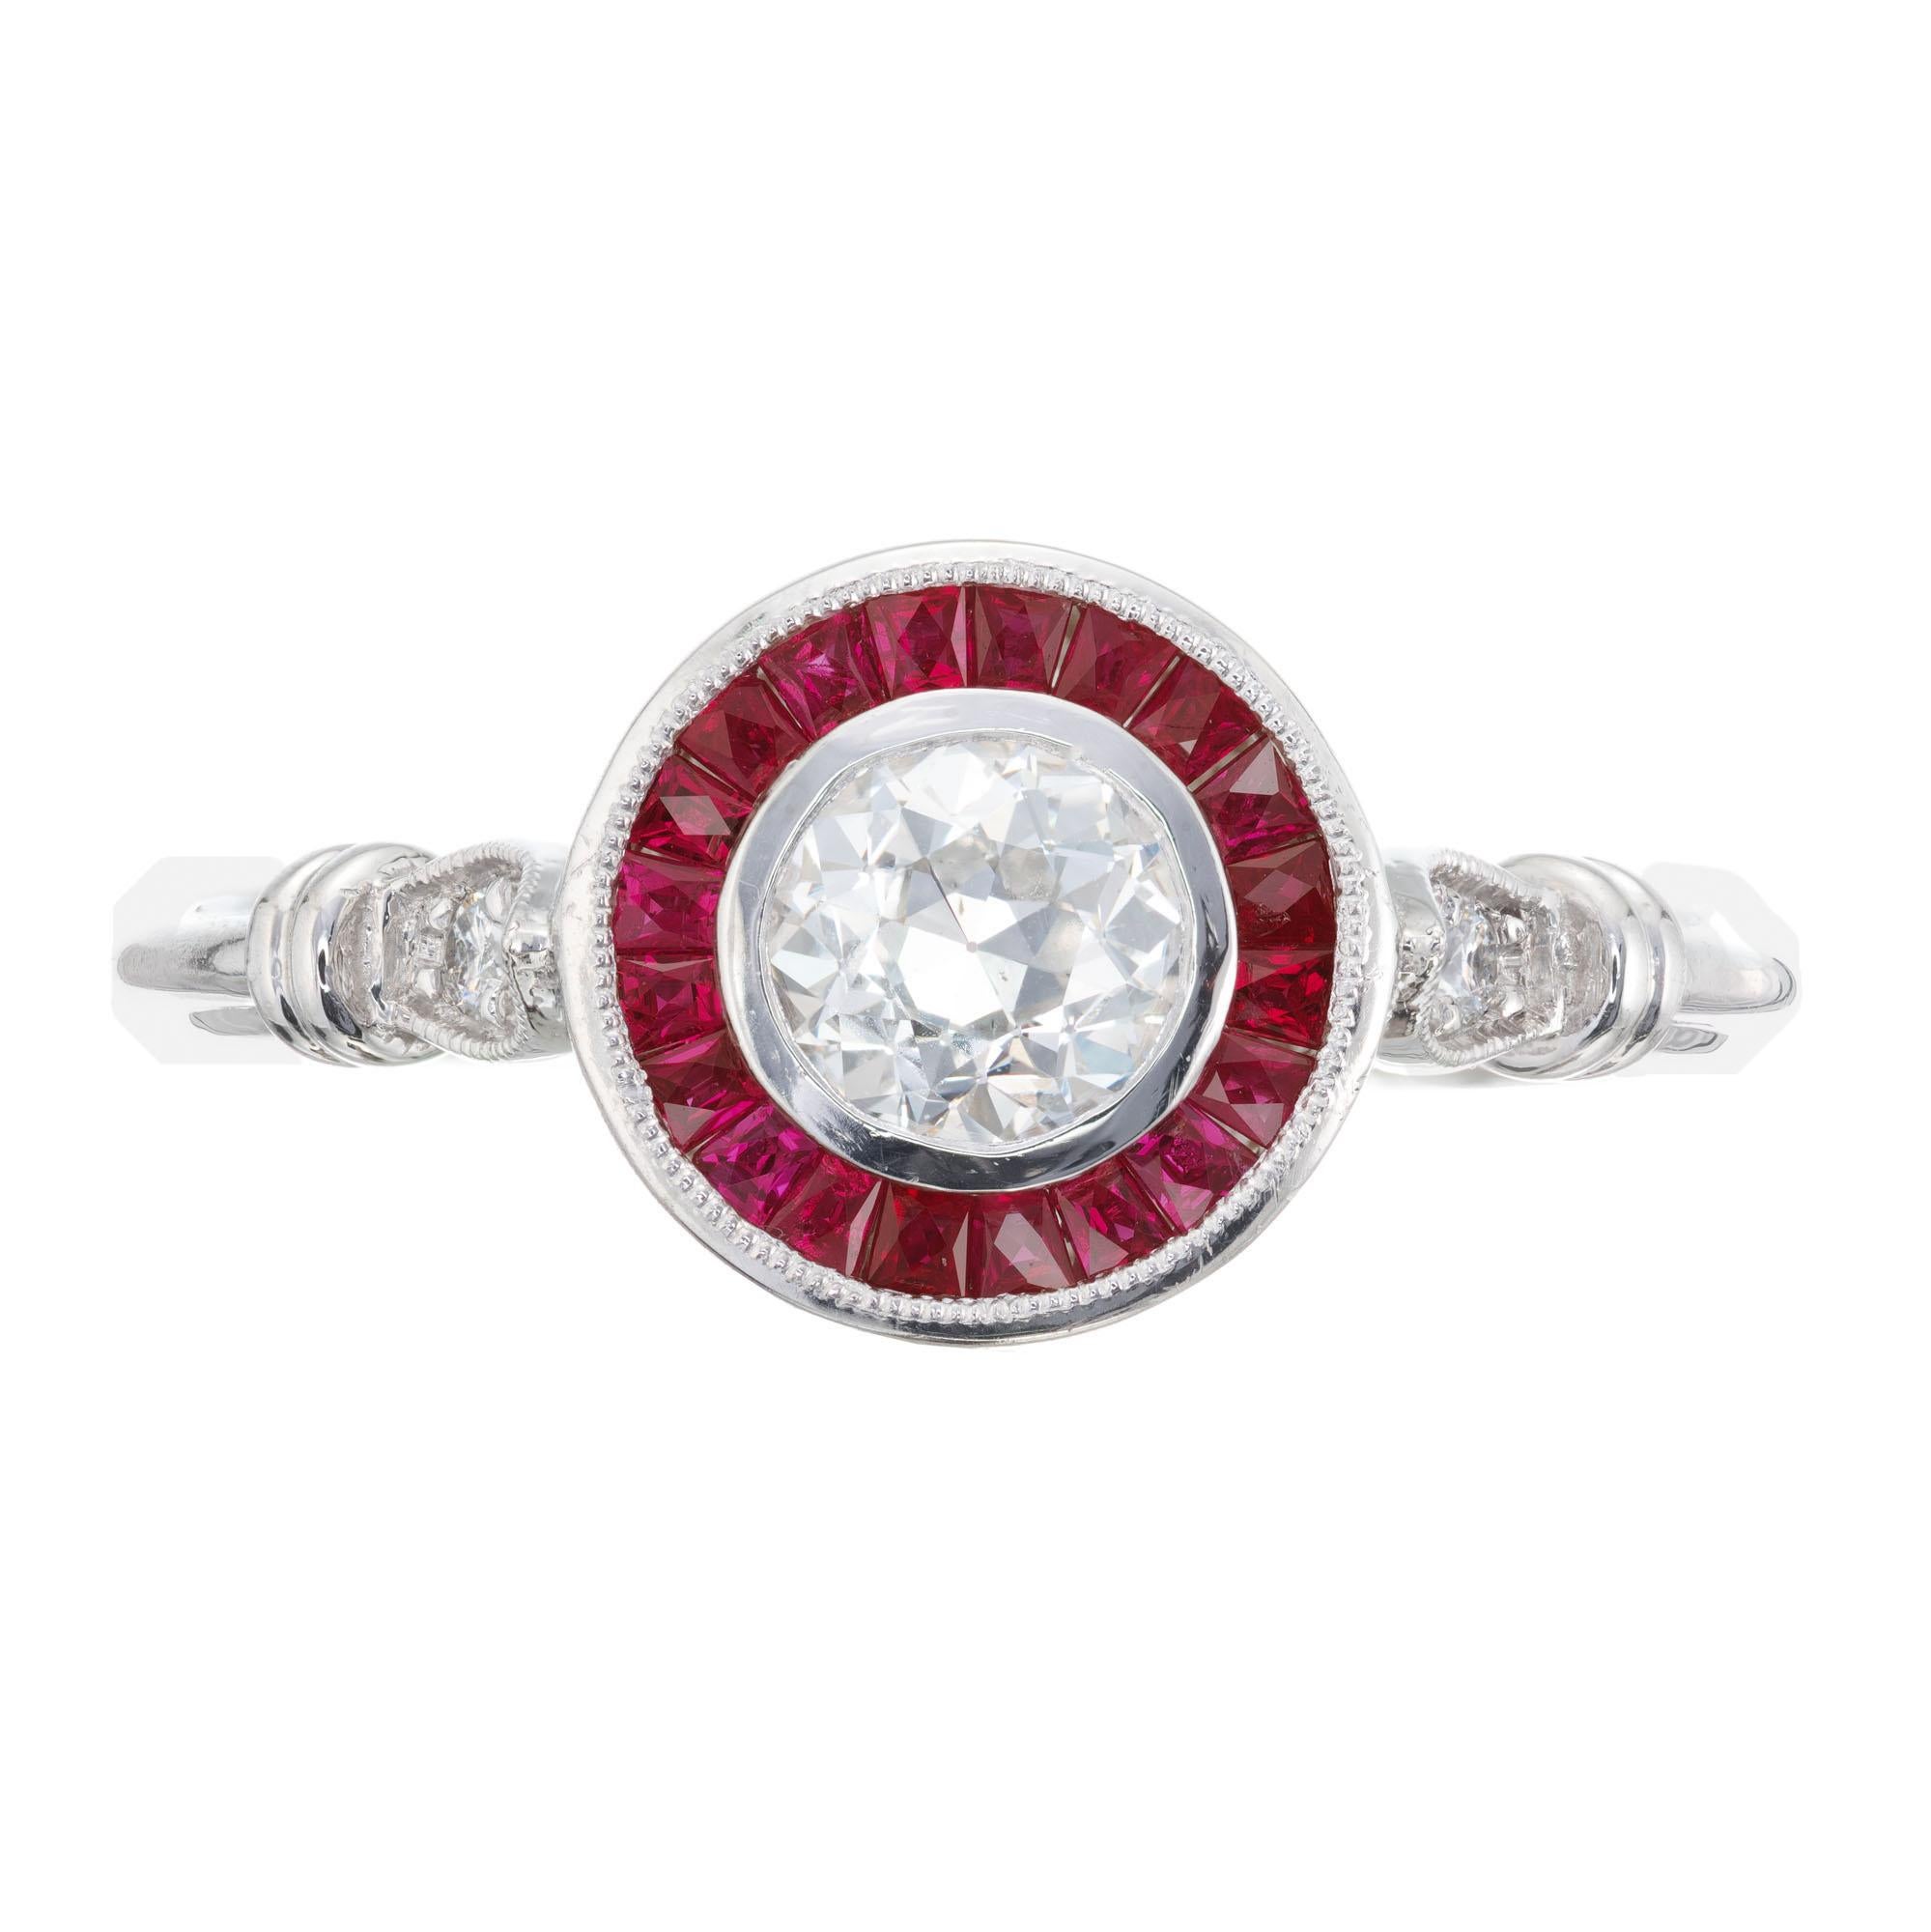 Diamond and sapphire engagement ring. EGL certified Old European round center diamond with a halo of calibre custom cut rubies in a platinum setting, with two diamonds on each side of the shank. Created in the Peter Suchy Workshop. 

1 old European